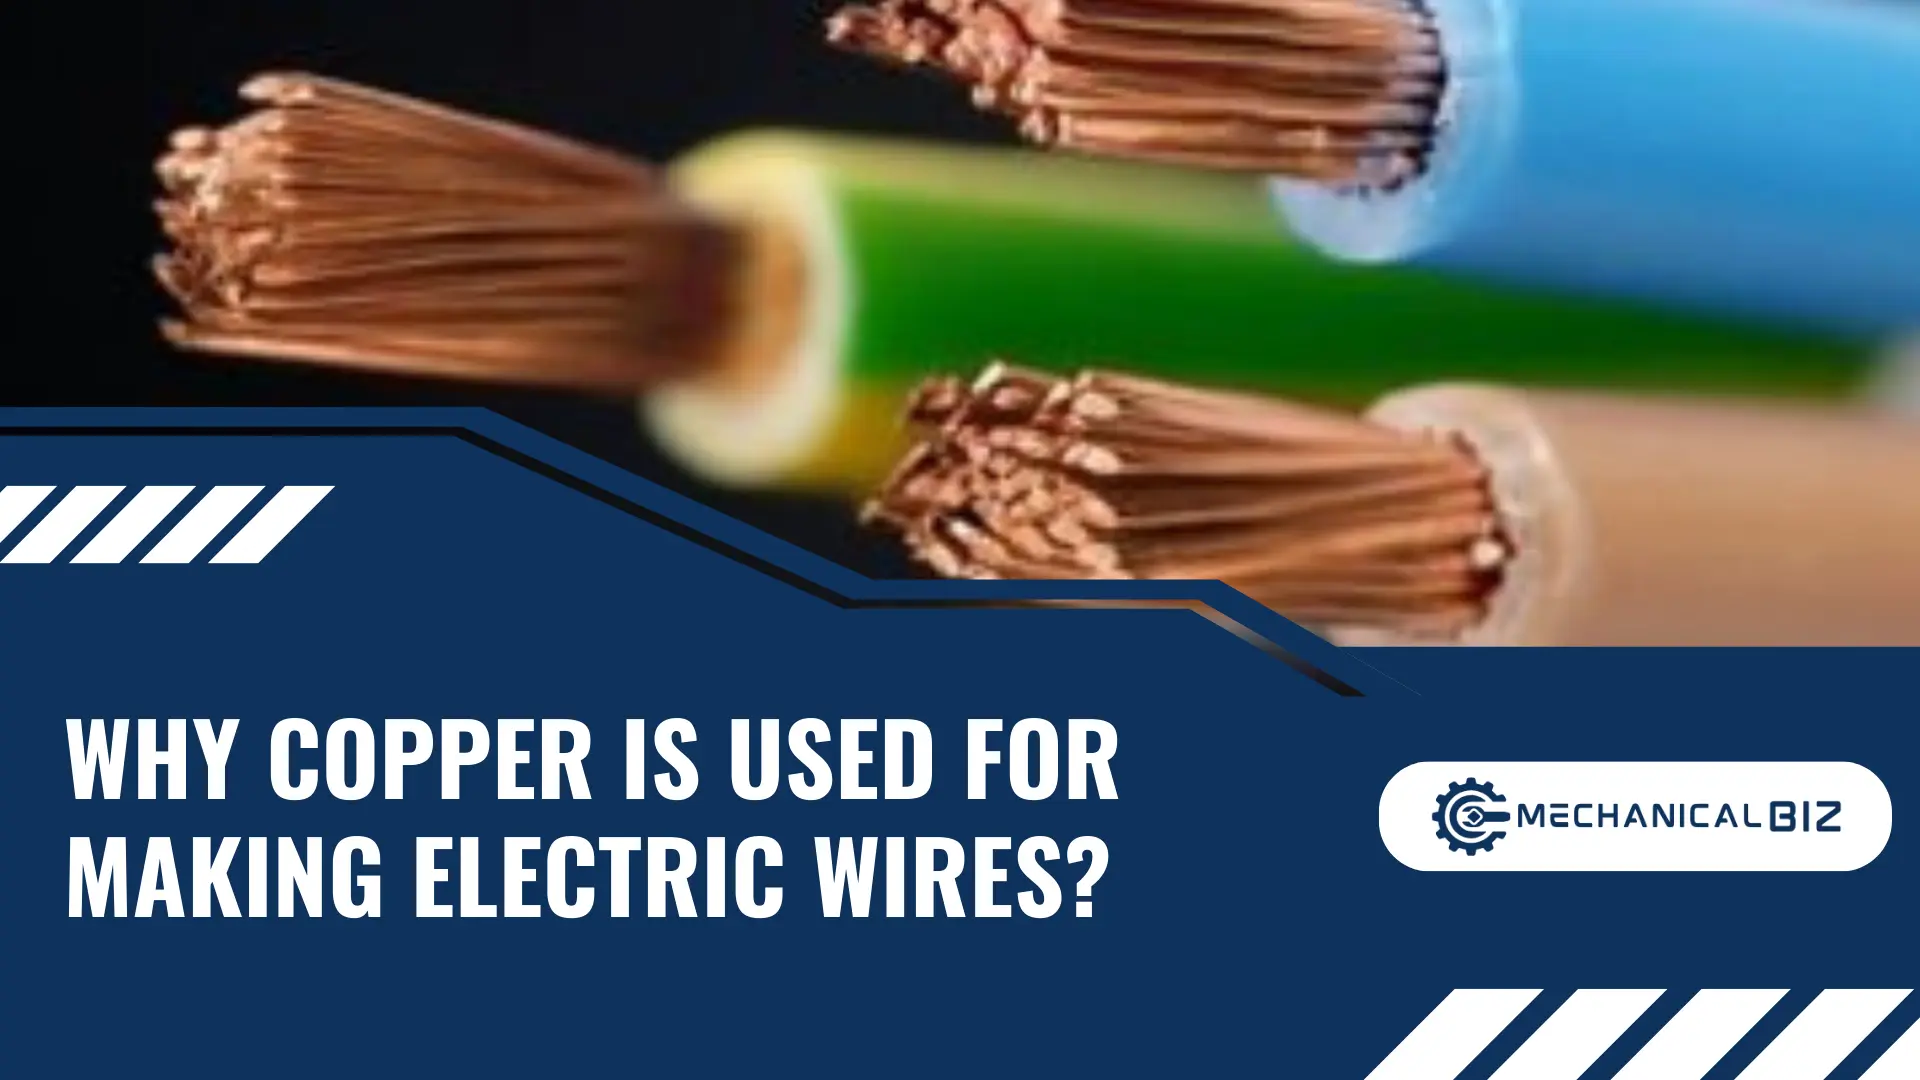 Why Copper is Used for Making Electric Wires